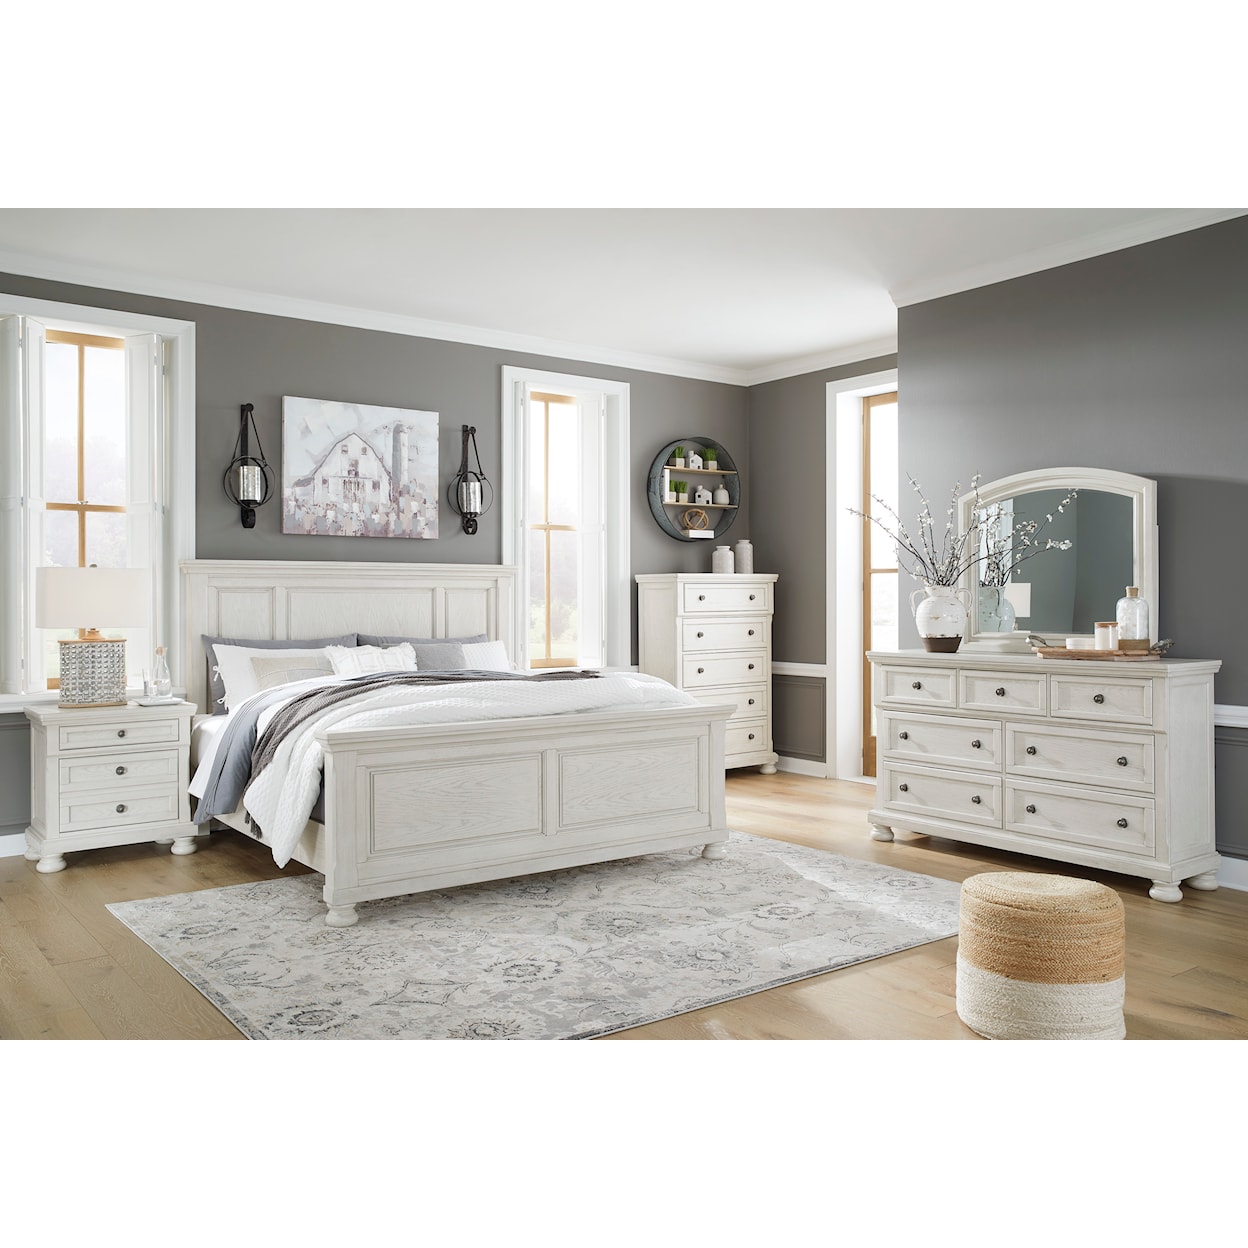 Signature Design by Ashley Robbinsdale 7pc Queen Bedroom Group